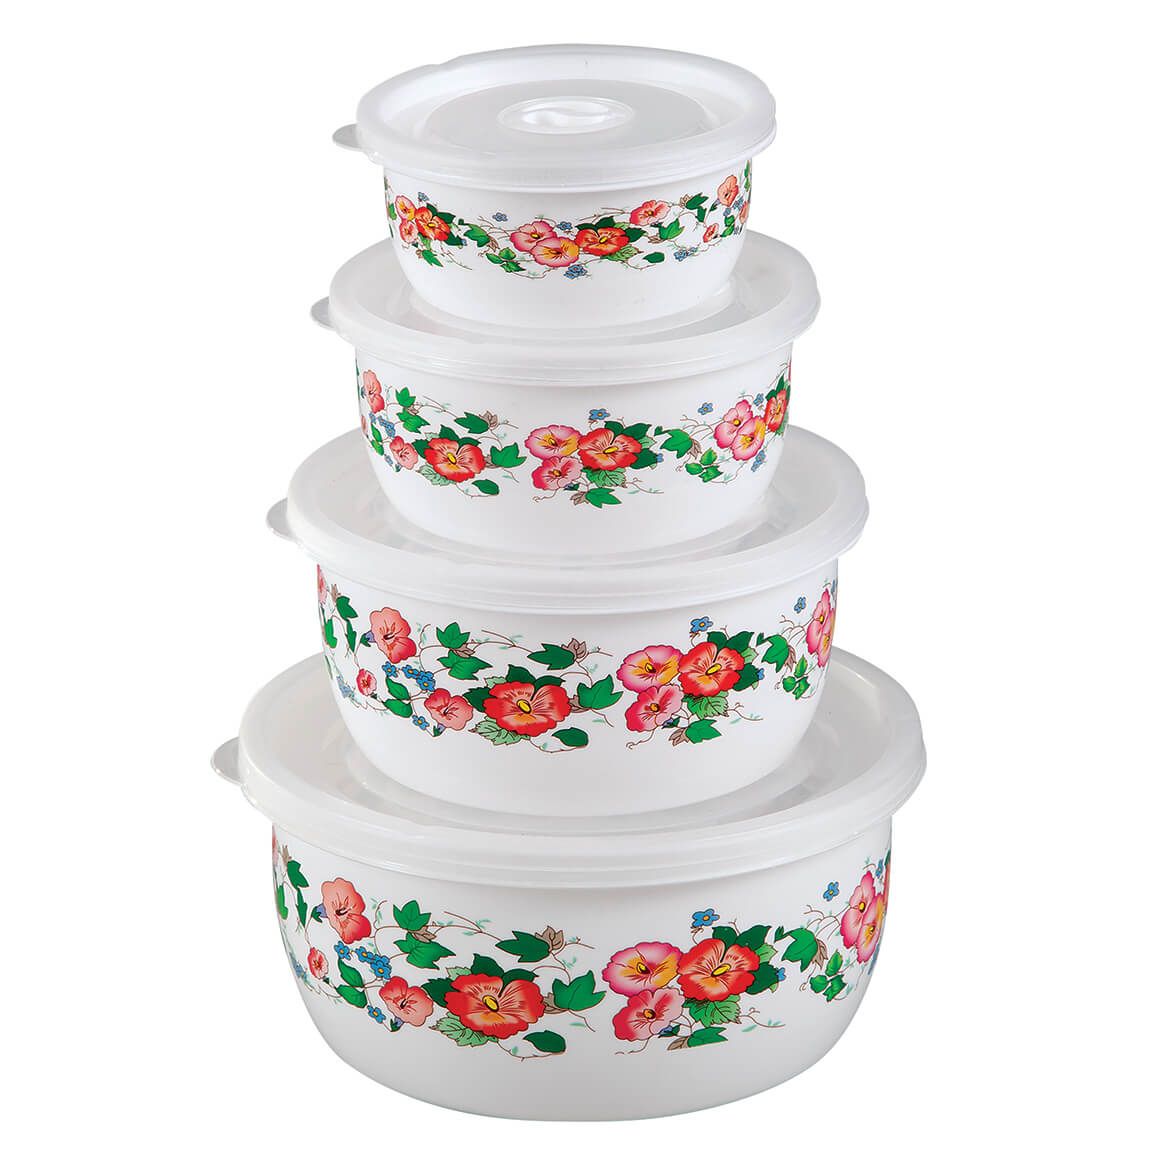 Nested Food Storage Set with Lids Set of 4  by Chef's Pride + '-' + 376857